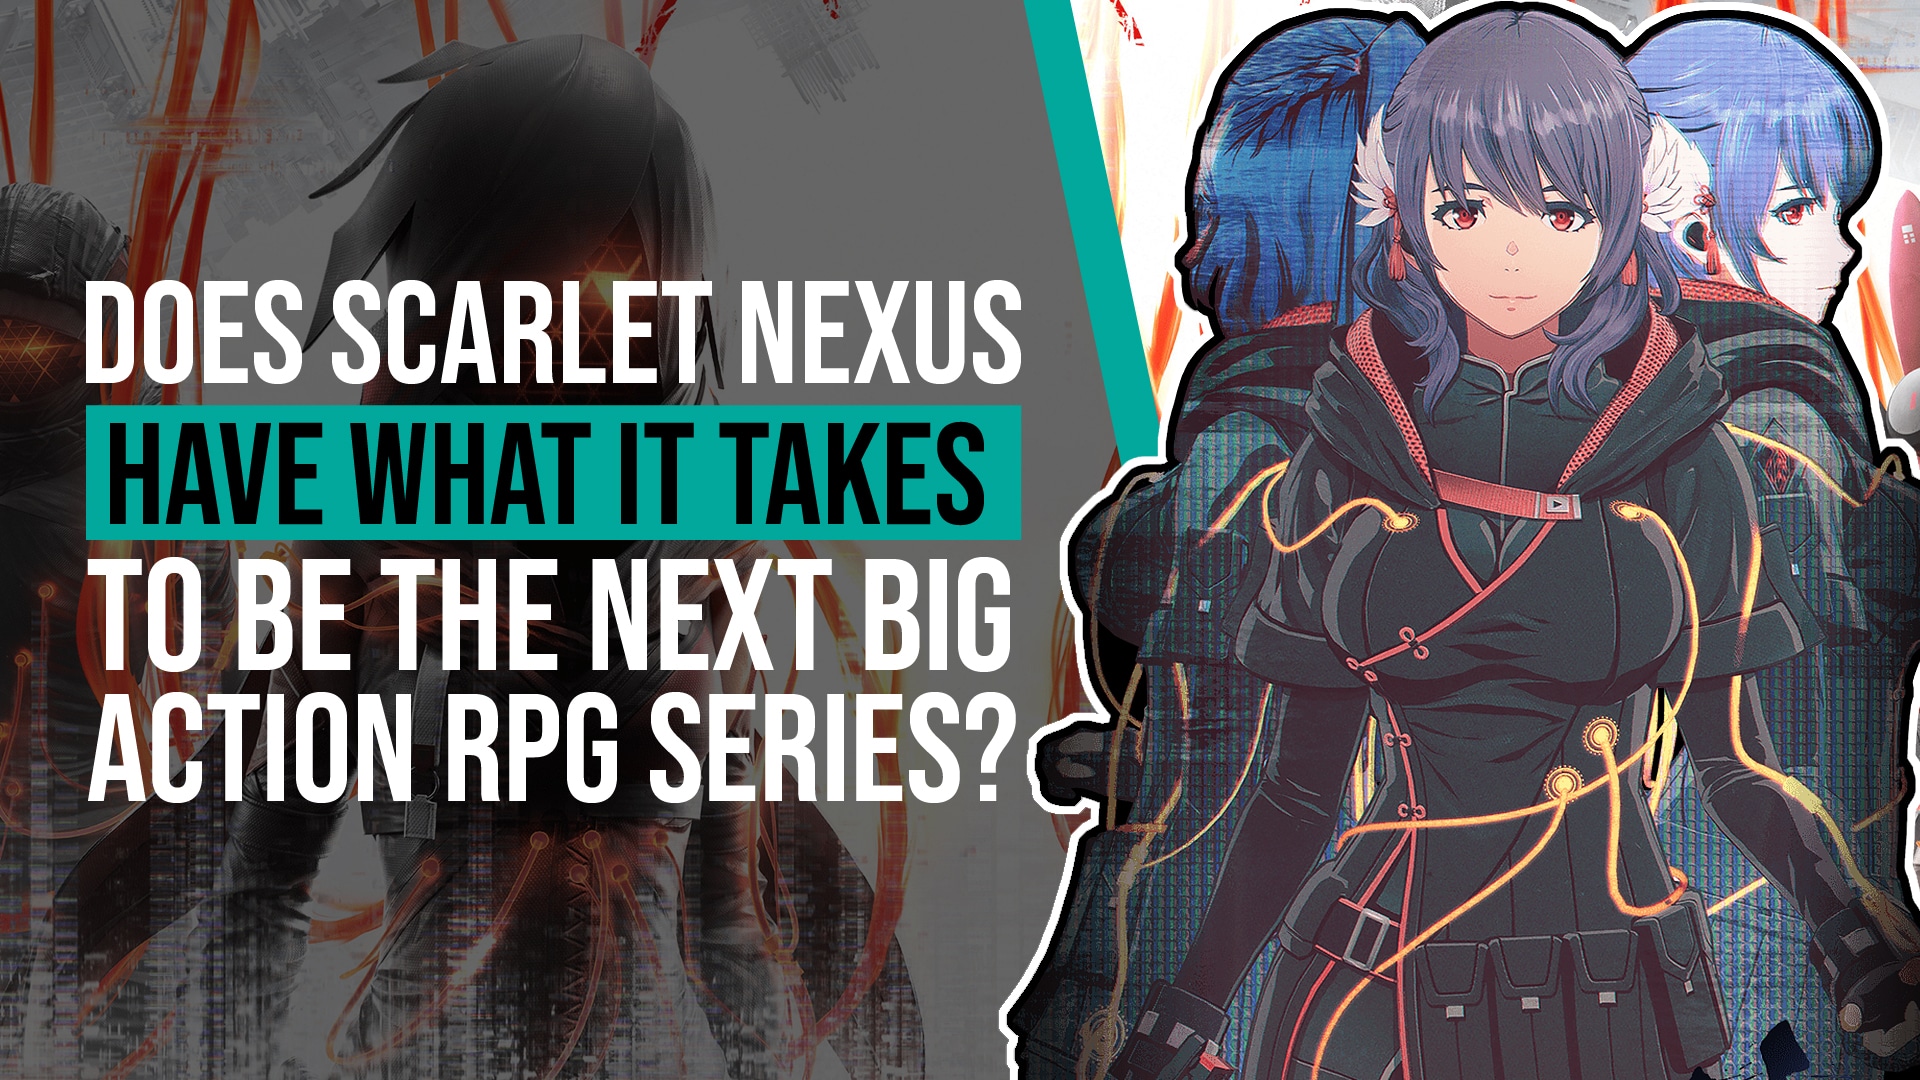 Does Scarlet Nexus Have What It Takes To Be The Next Big Action RPG Series?